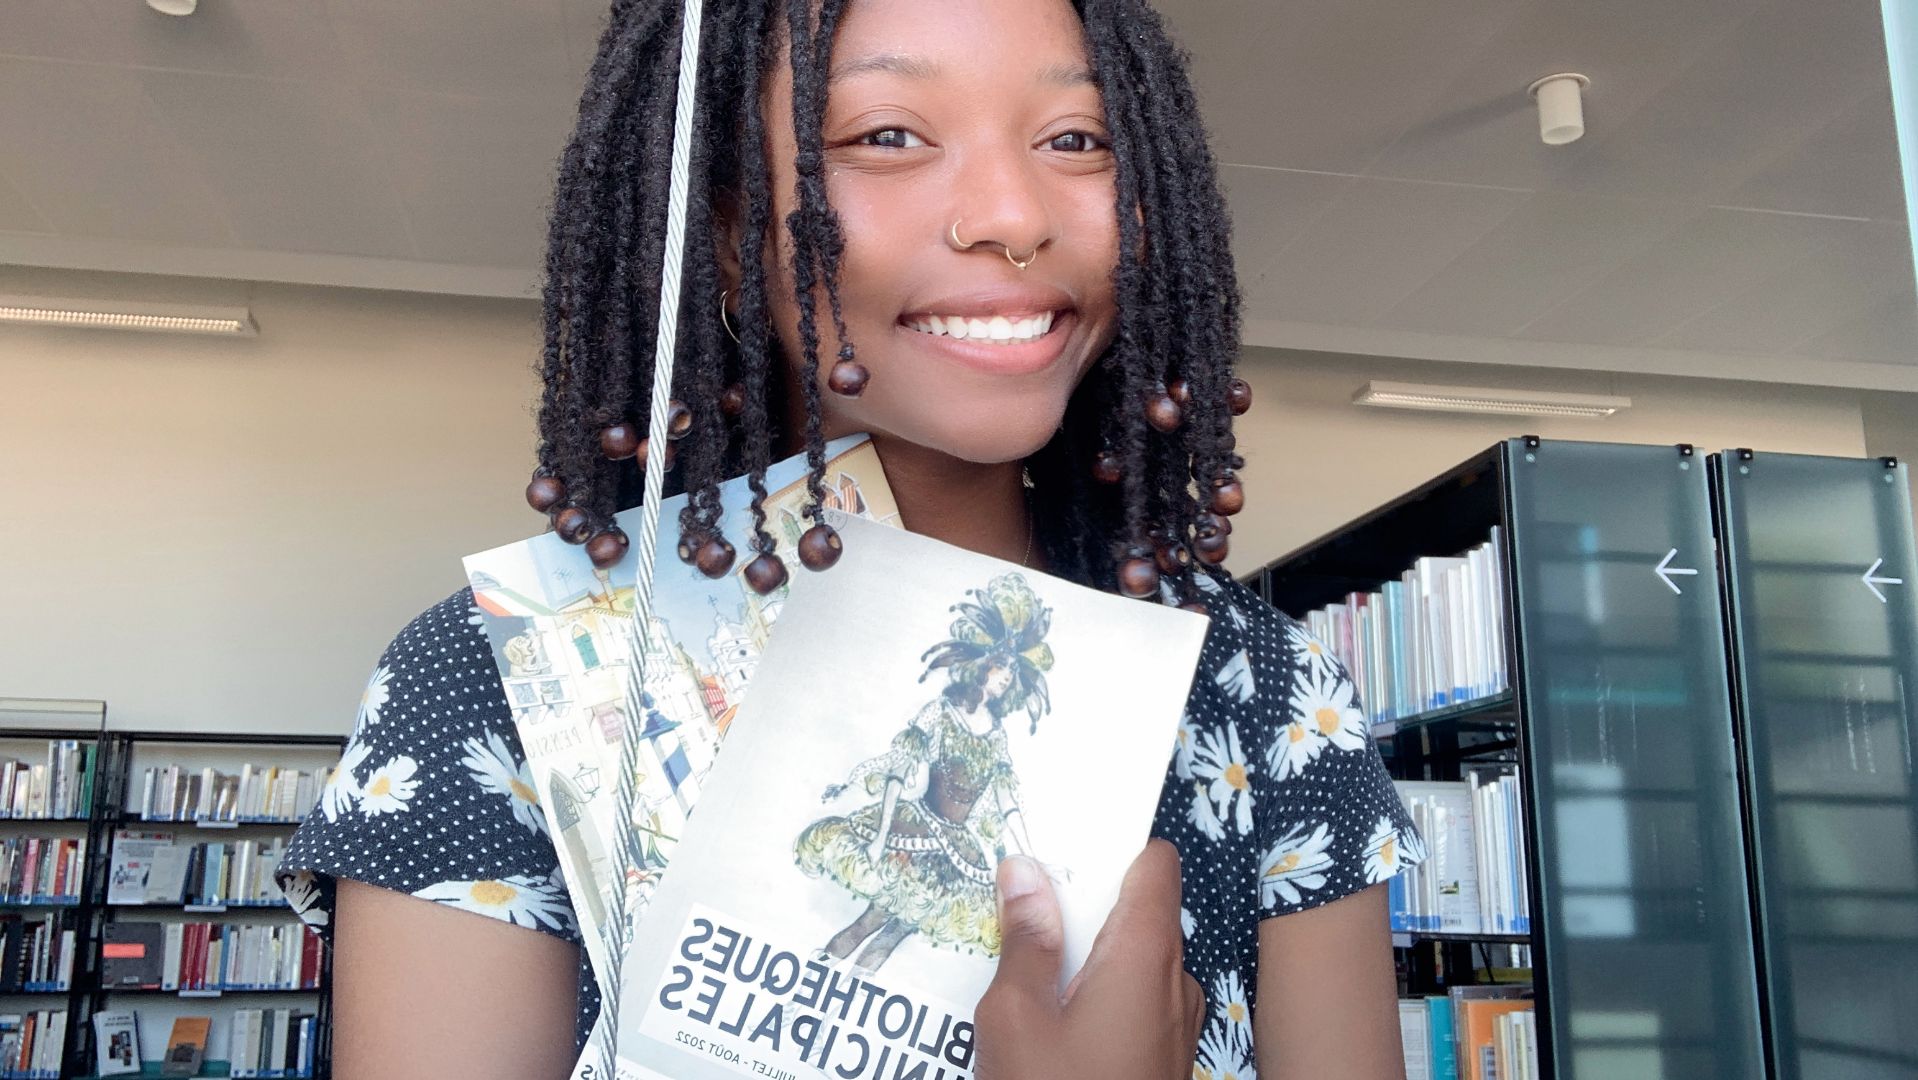 Destiny holding a french book in a library in France